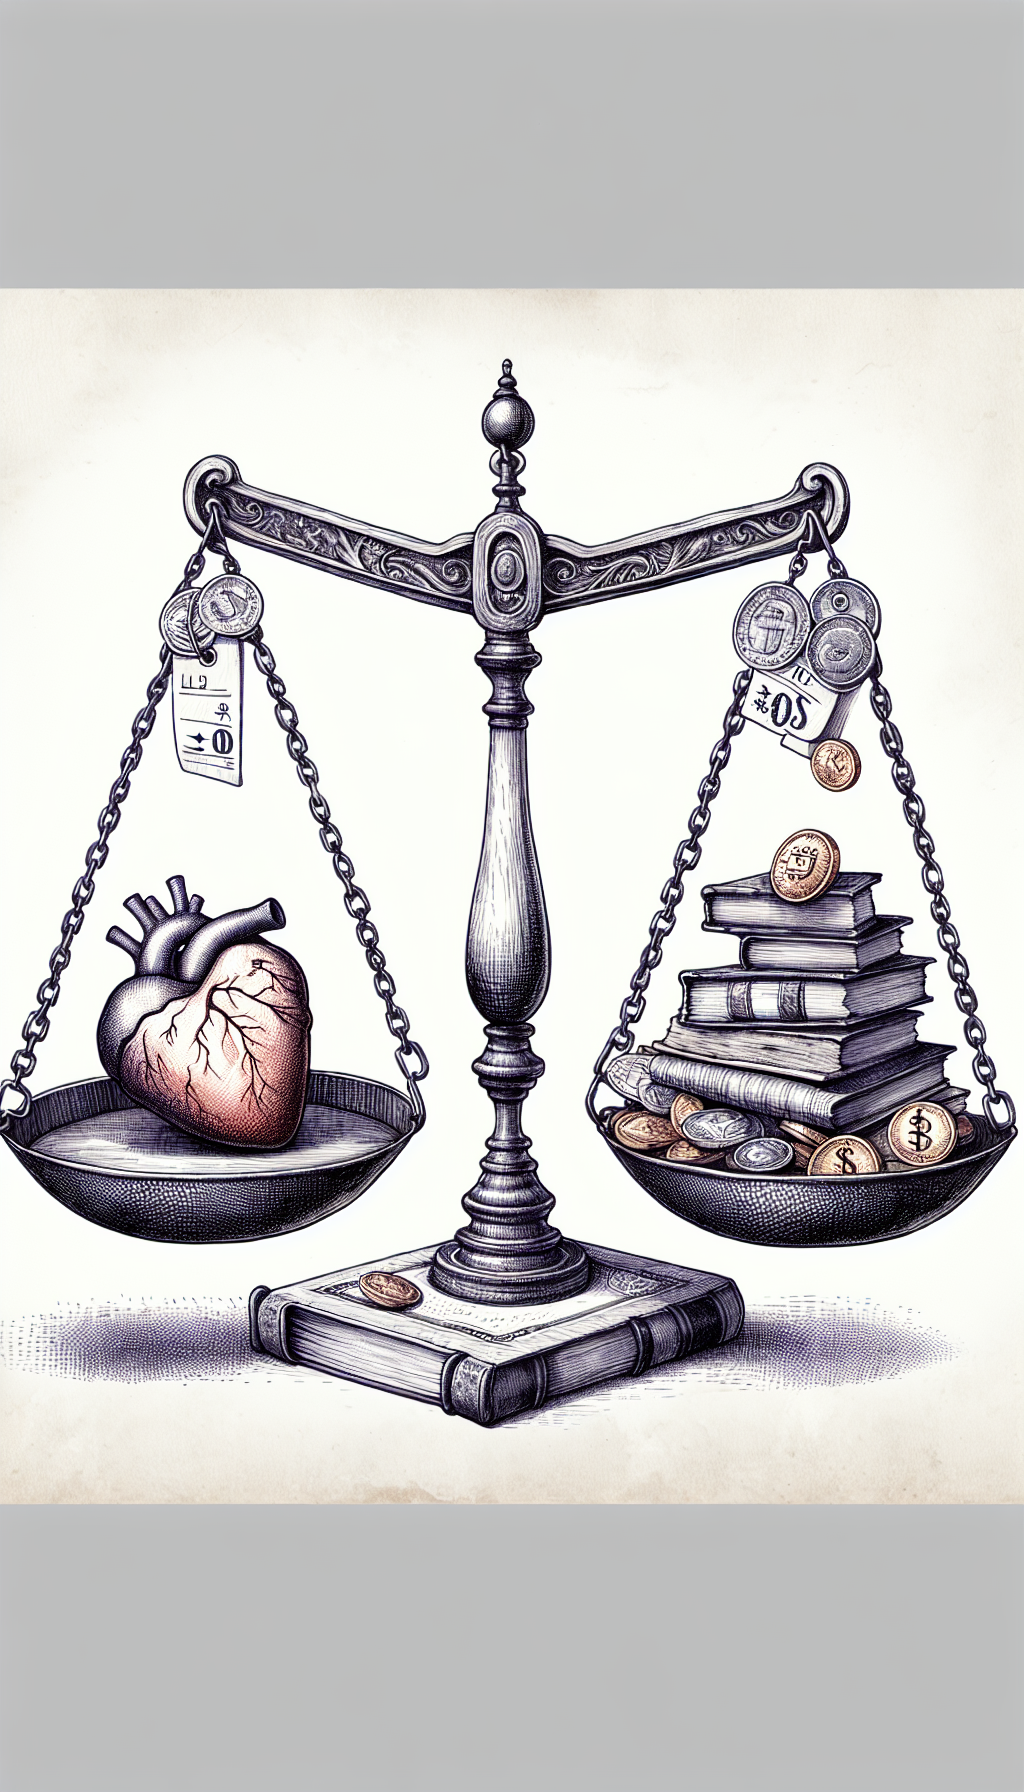 An illustration depicts a whimsical balance scale; on one side, a heart-shaped icon represents sentiment, while on the other, coins and bills symbolize cents. Perched atop vintage books as the fulcrum, the image subtly shows antique books with visible price tags reading "$0," blending ink sketches with watercolor tones to convey the free value of vintage volumes.